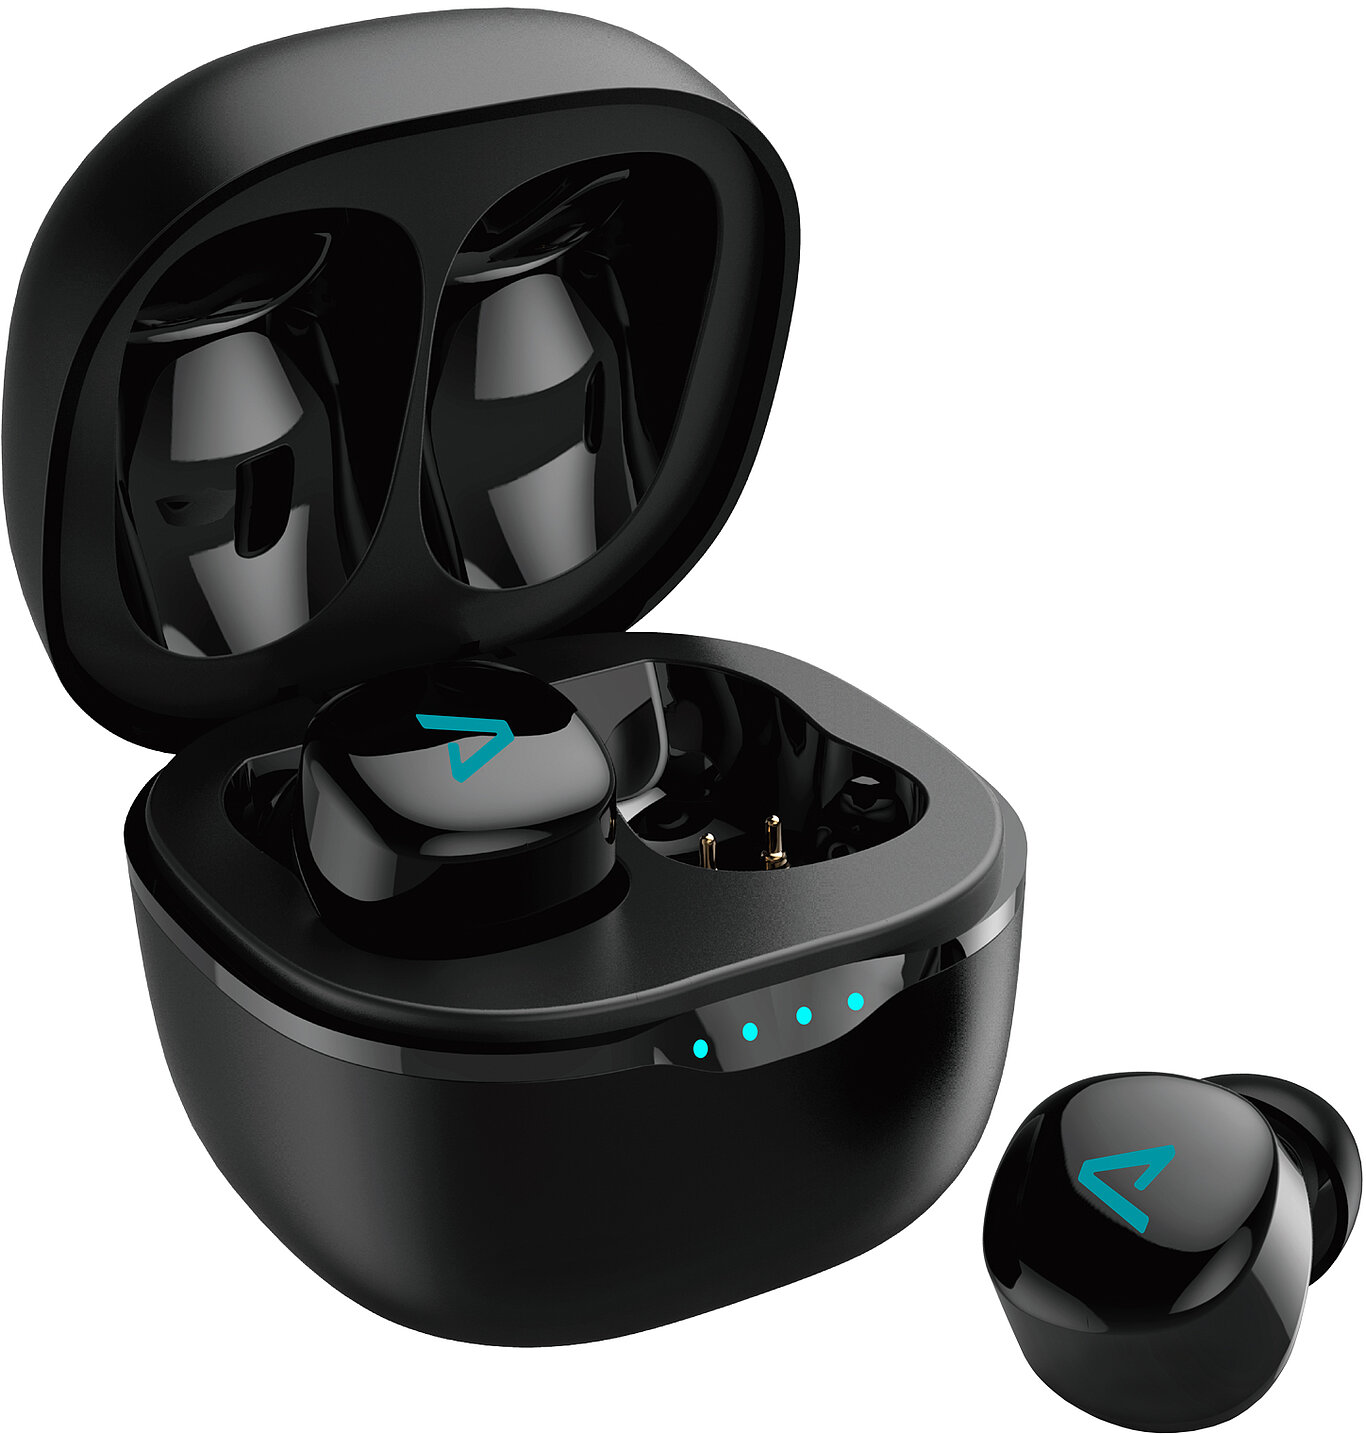 LAMAX Dots2 Touch Black - The smallest earphones on the market that fit everyone